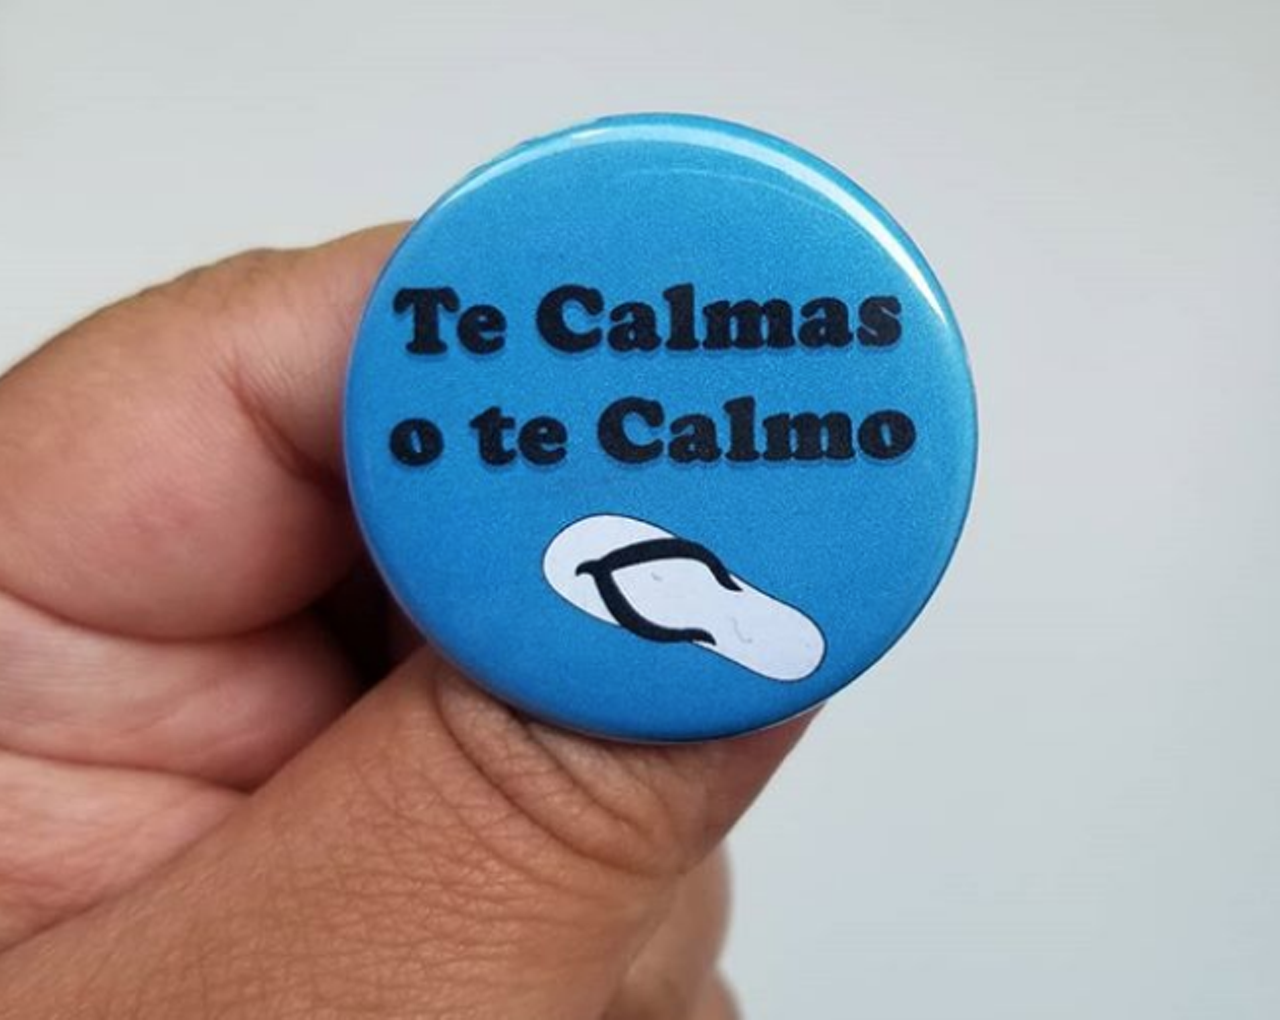 “¡Pasiguate!” / “Te calmas o te calmo”
Sometimes, all it took was a mamá snarling at you for you to get your shit together.
Photo via Instagram / candyskloset